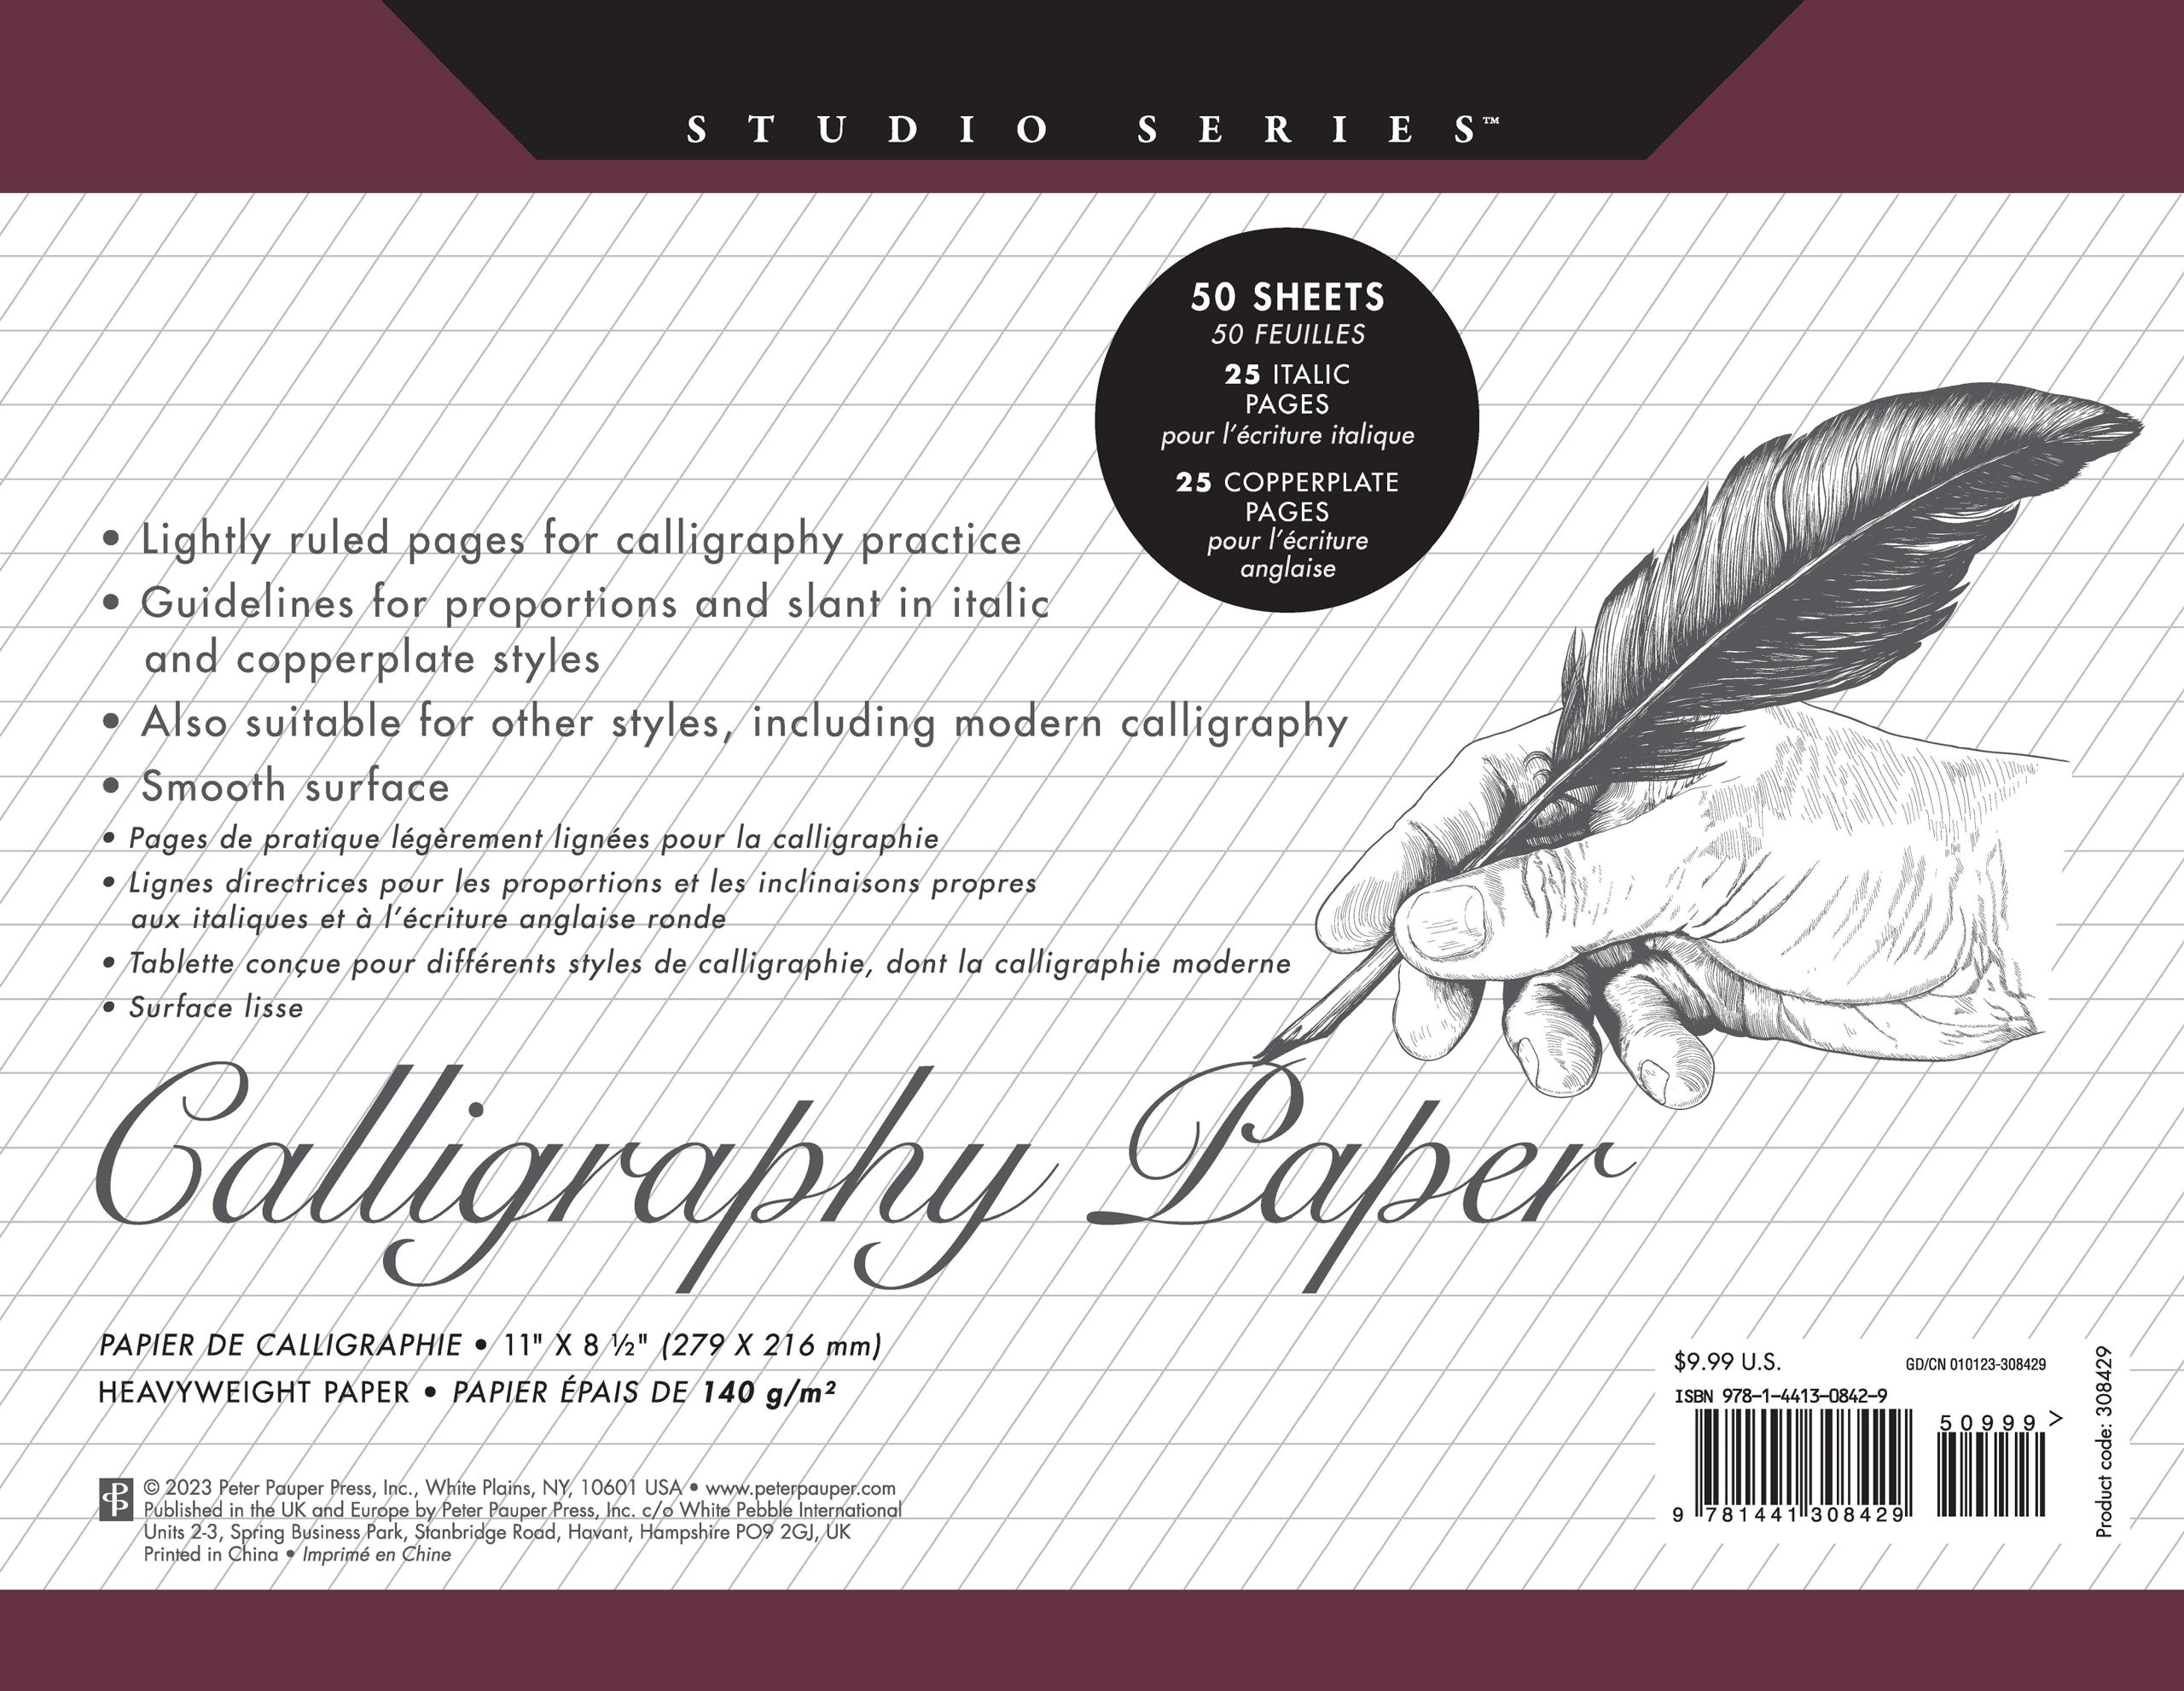 Calligraphy Practice Notebook for Beginners: Modern Calligraphy Slant Angle  Lined Guide, Alphabet Practice & Dot Grid Paper Practice Sheets for